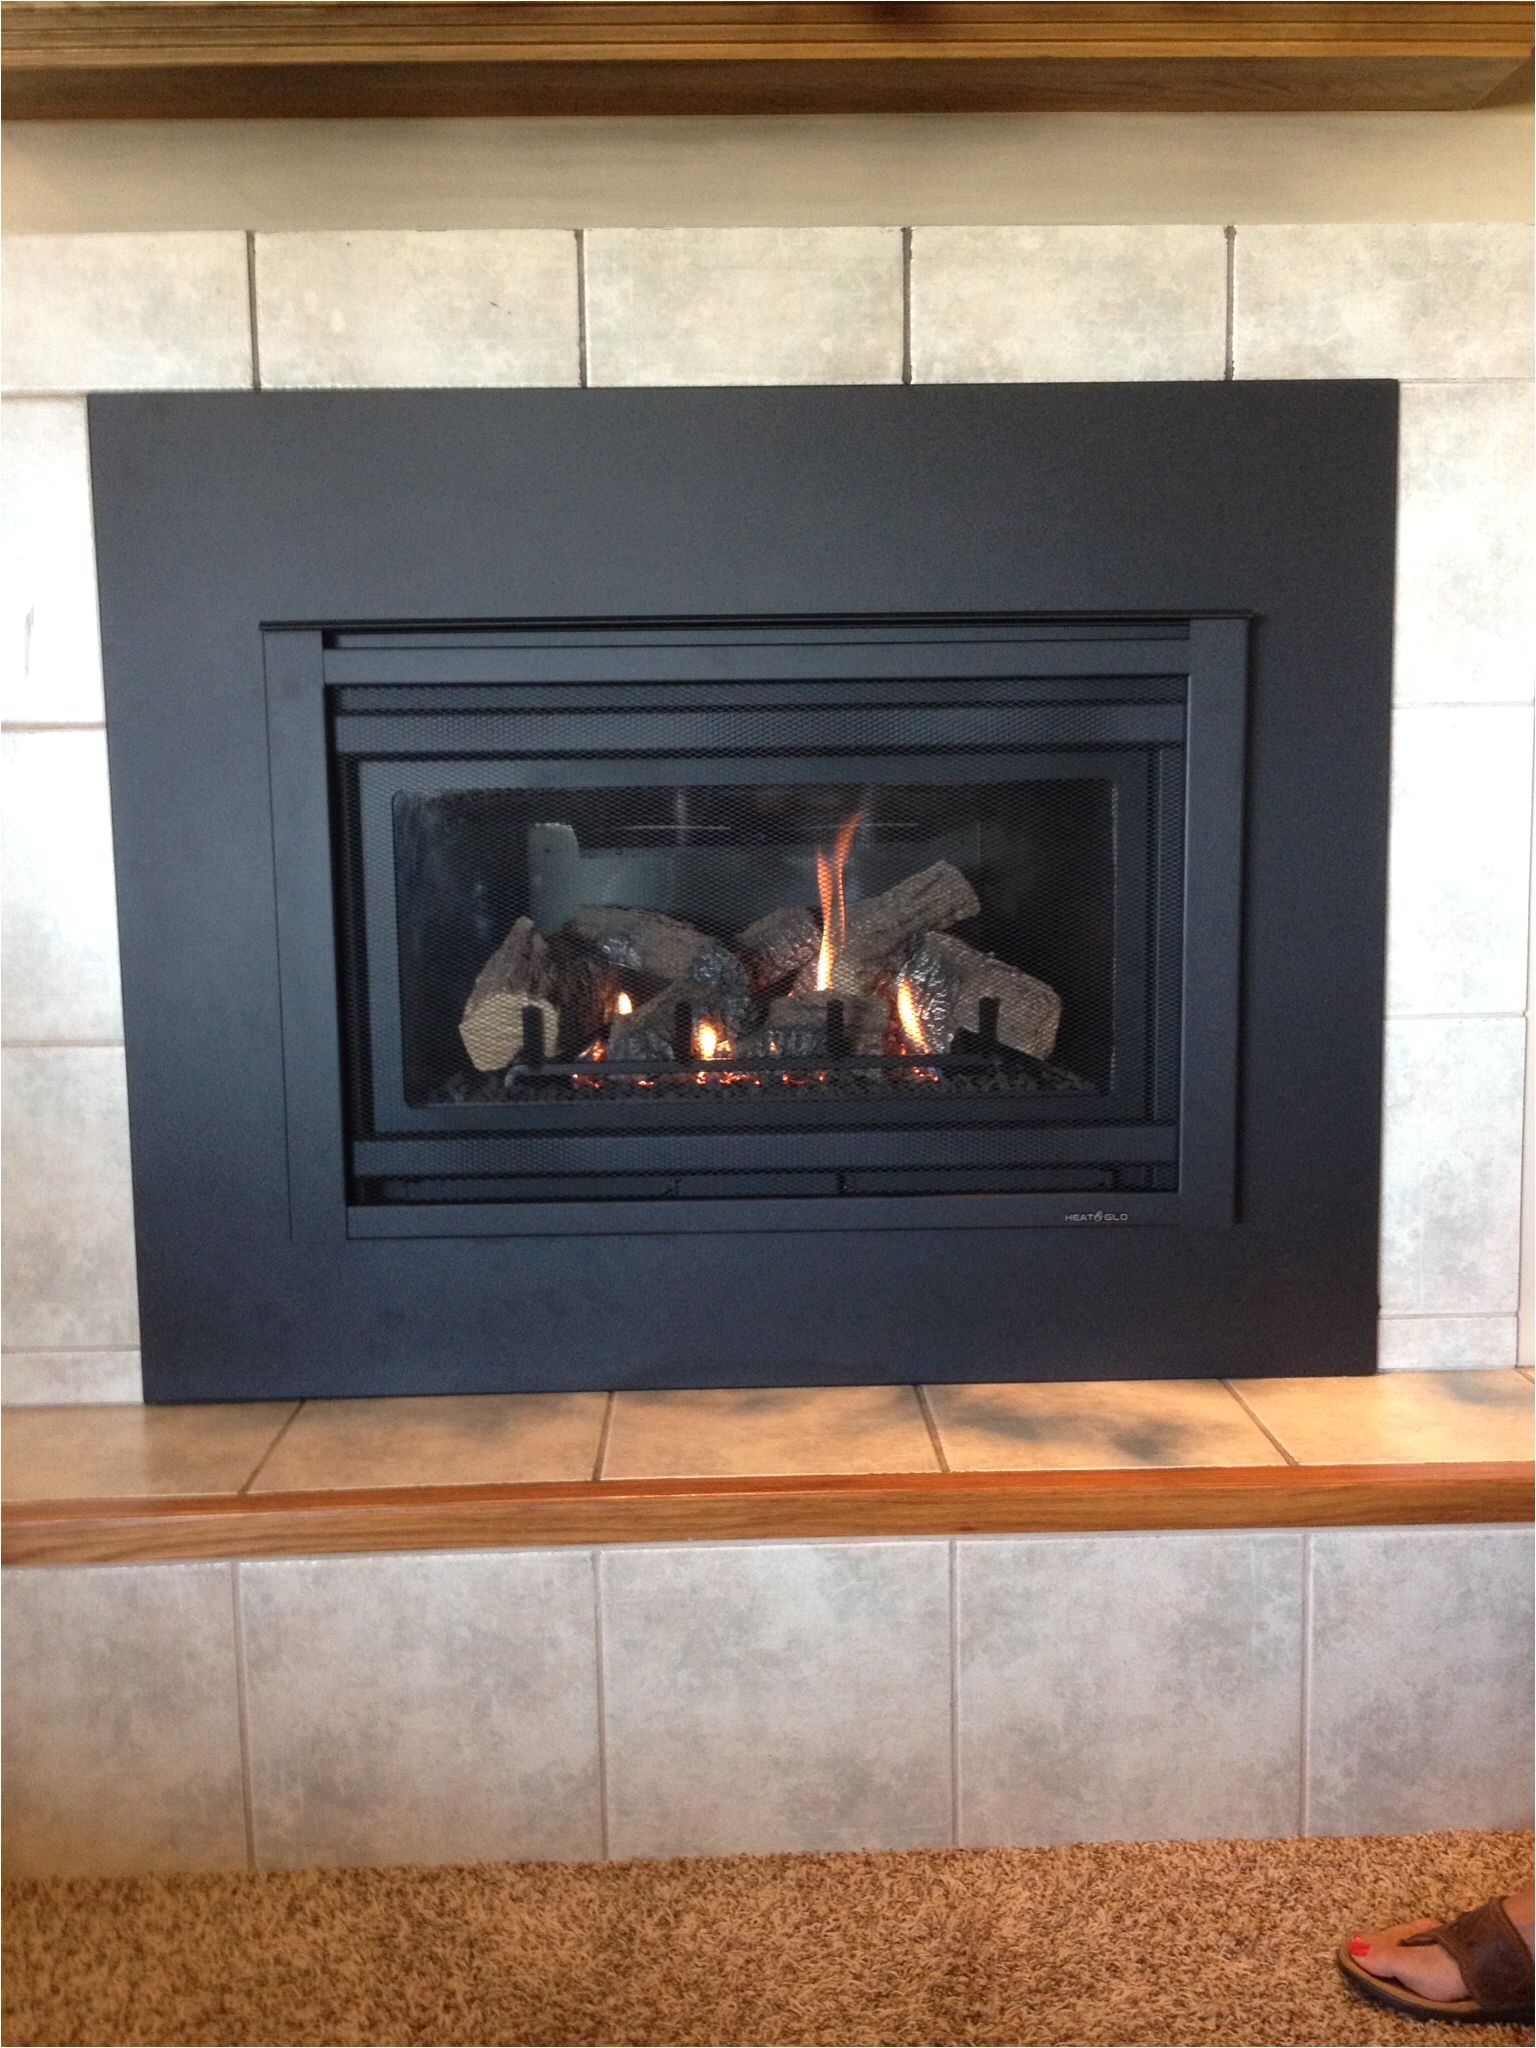 Fireplace Inserts Denver Colorado Heat N Glo Supreme I 30 Gas Insert with Custom Surround Panel